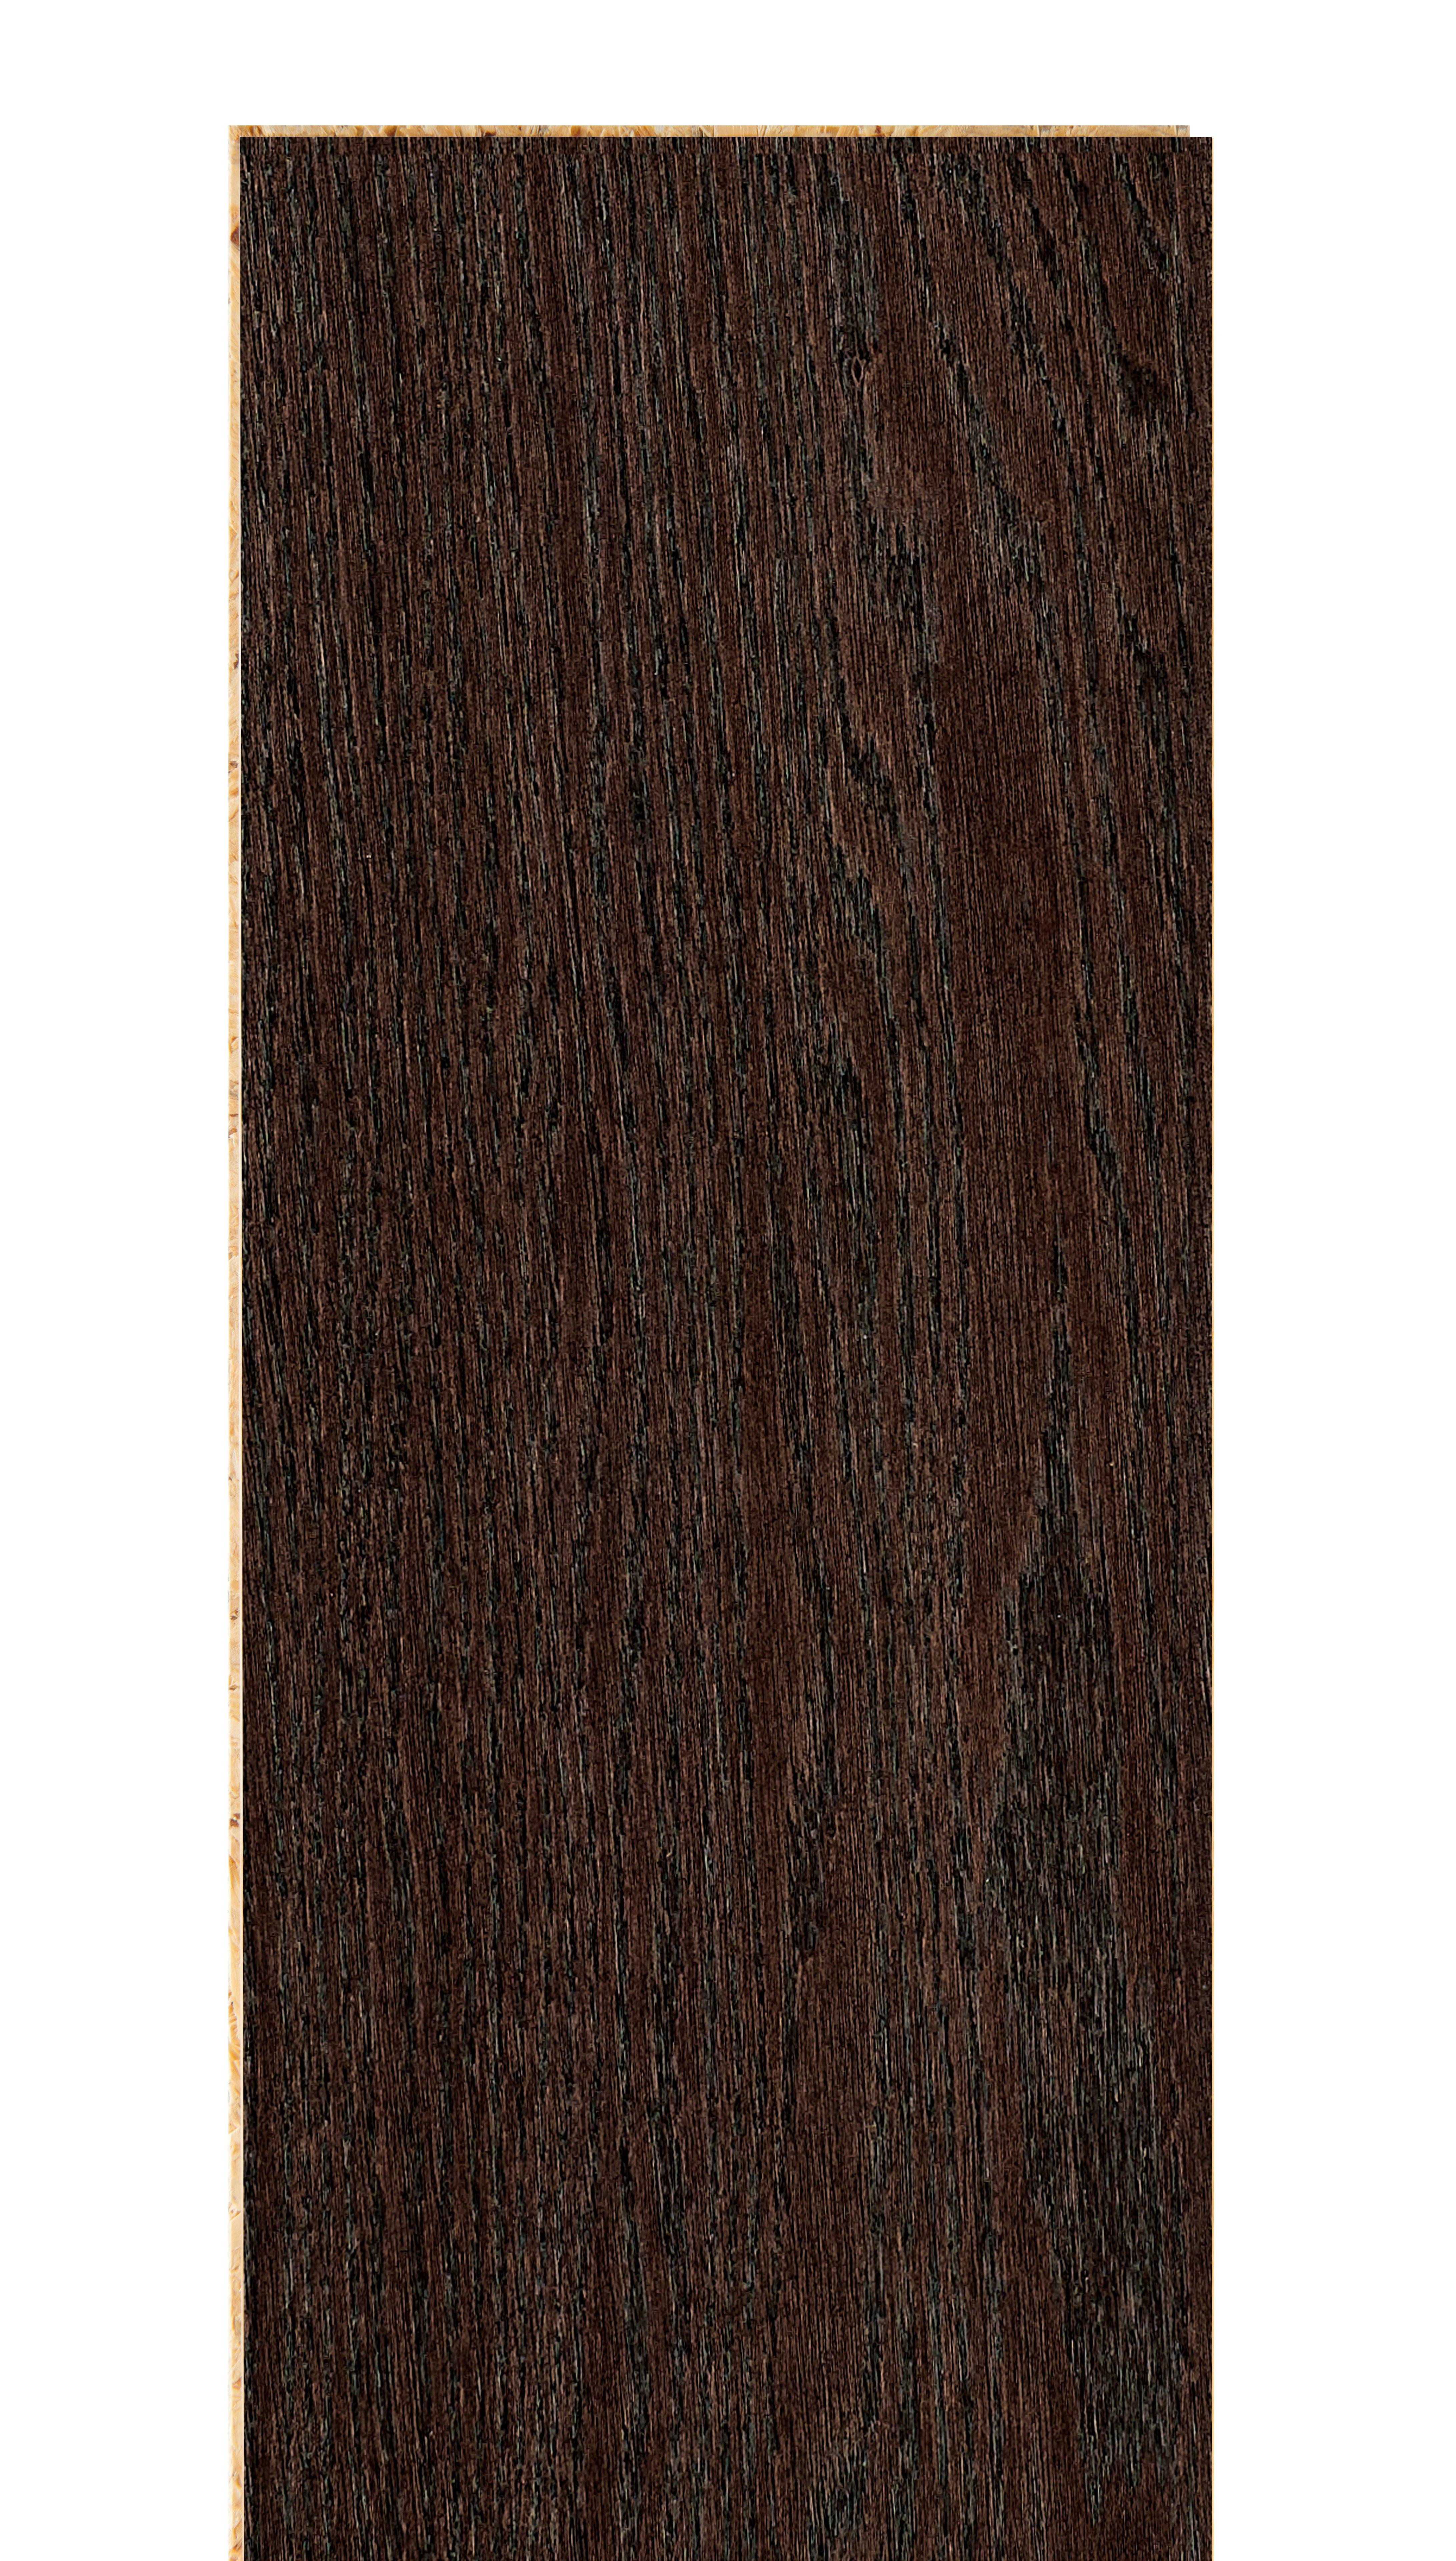 Parson Red Oak Wire-Brushed Engineered Hardwood